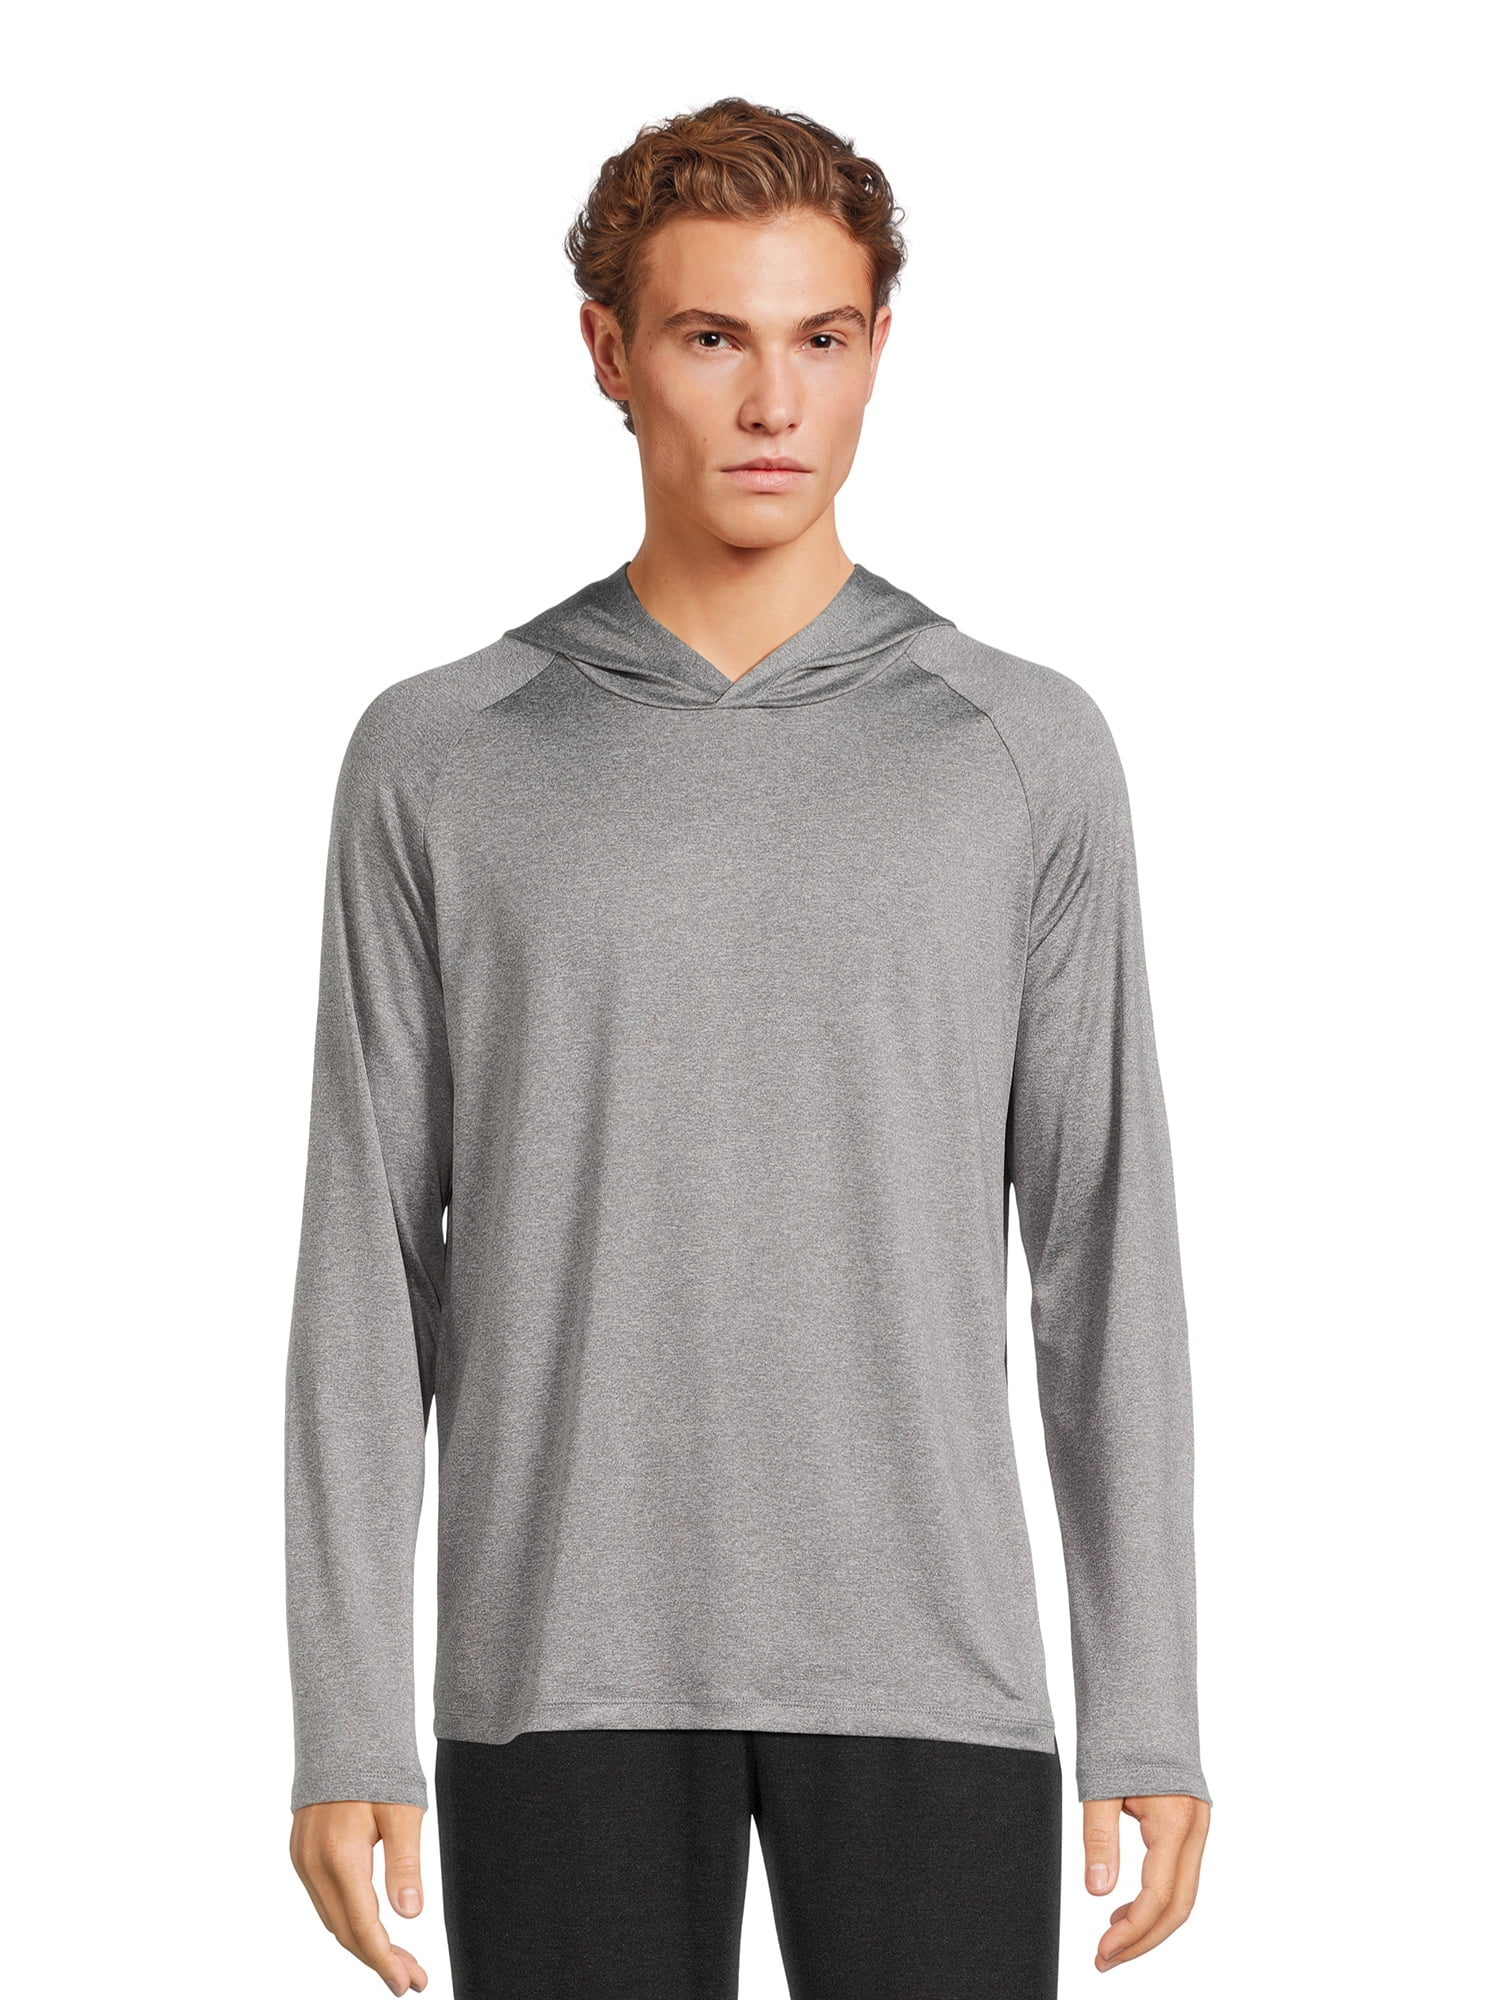 George Men’s Hooded Sun Shirt with Long Sleeves, Sizes S-3XL - Walmart.com